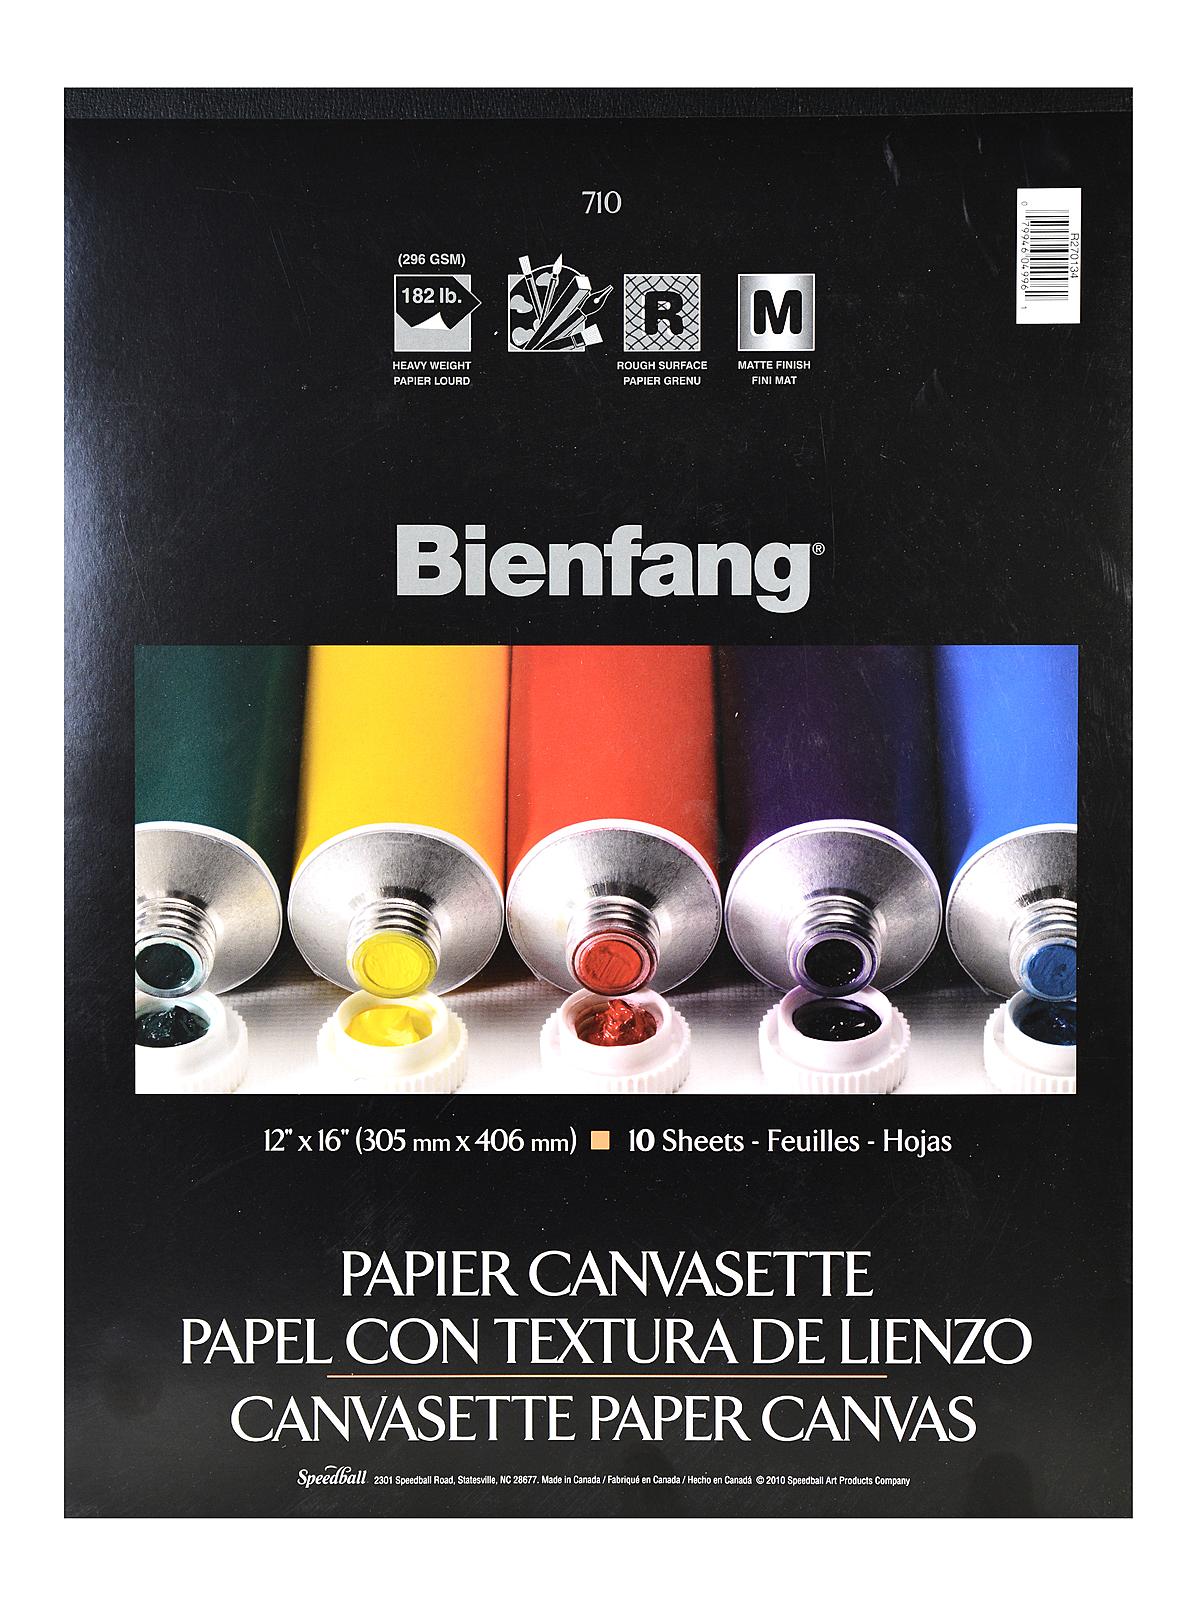 Canvasette Paper Canvas 12 In. X 16 In. Pad Of 10 Sheets